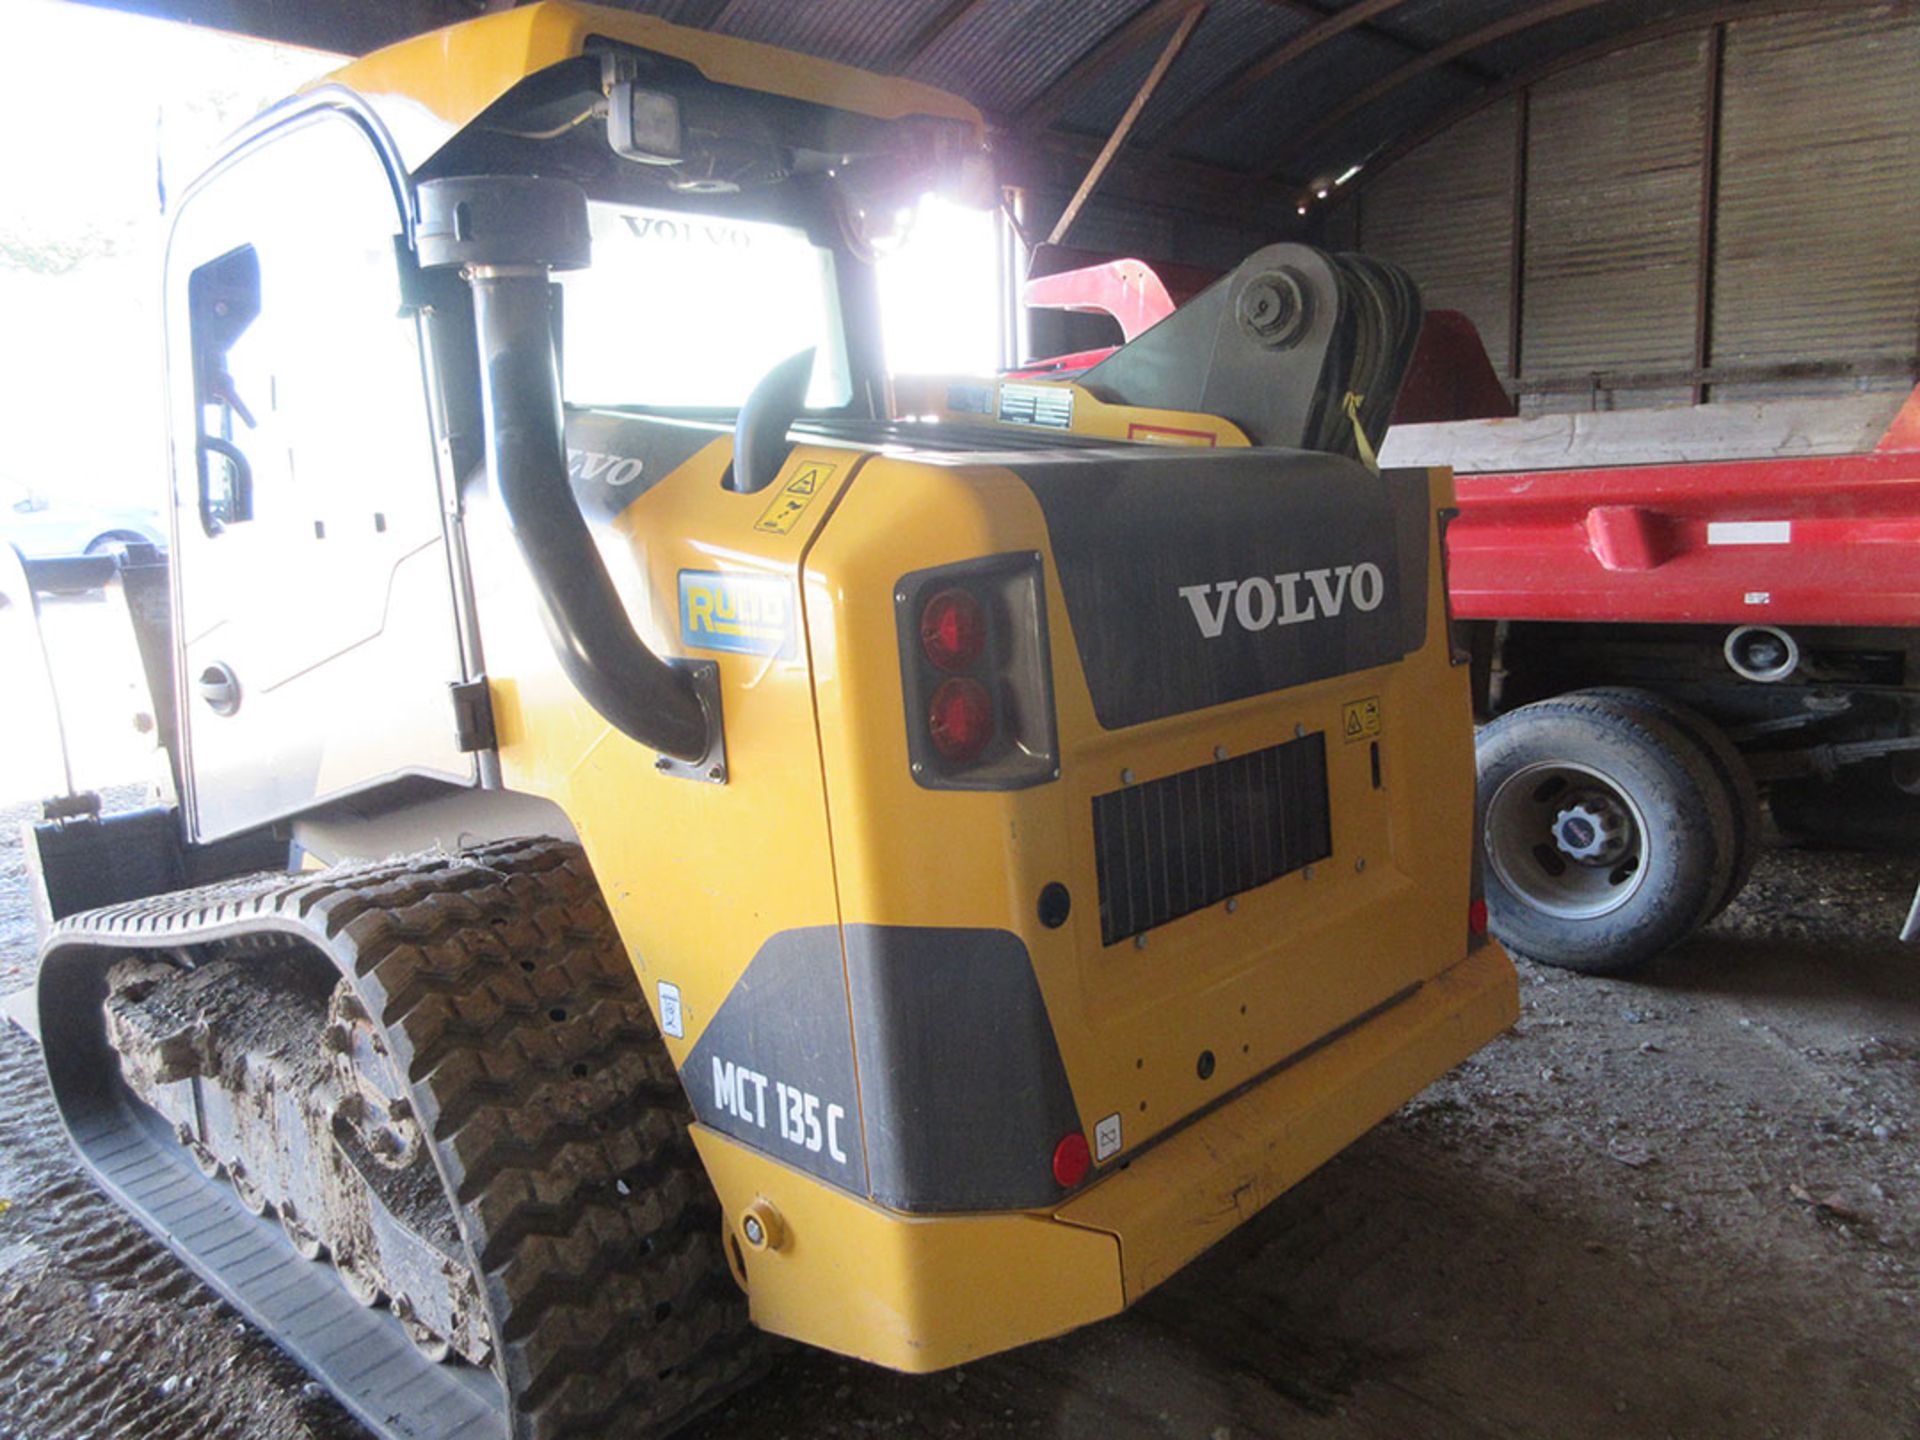 2012 VOLVO MCT 135C SKID STEER; PYRAMID RUBBER TRACTS, ARM REST STEERING, BUCKET CONTROL, FOOT PEDAL - Image 3 of 5